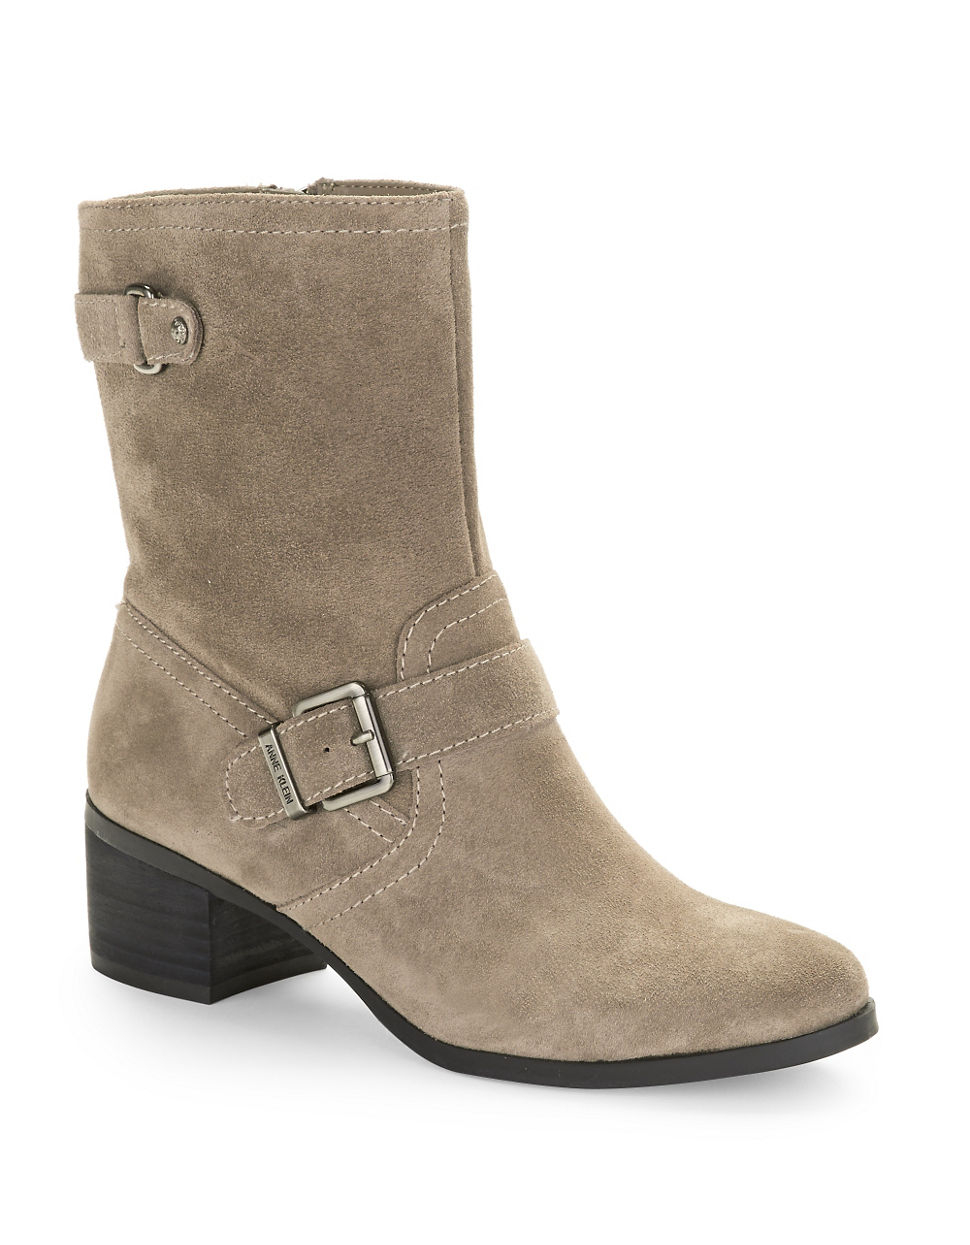 Lyst - Anne Klein Junta Ankle Boots in Natural